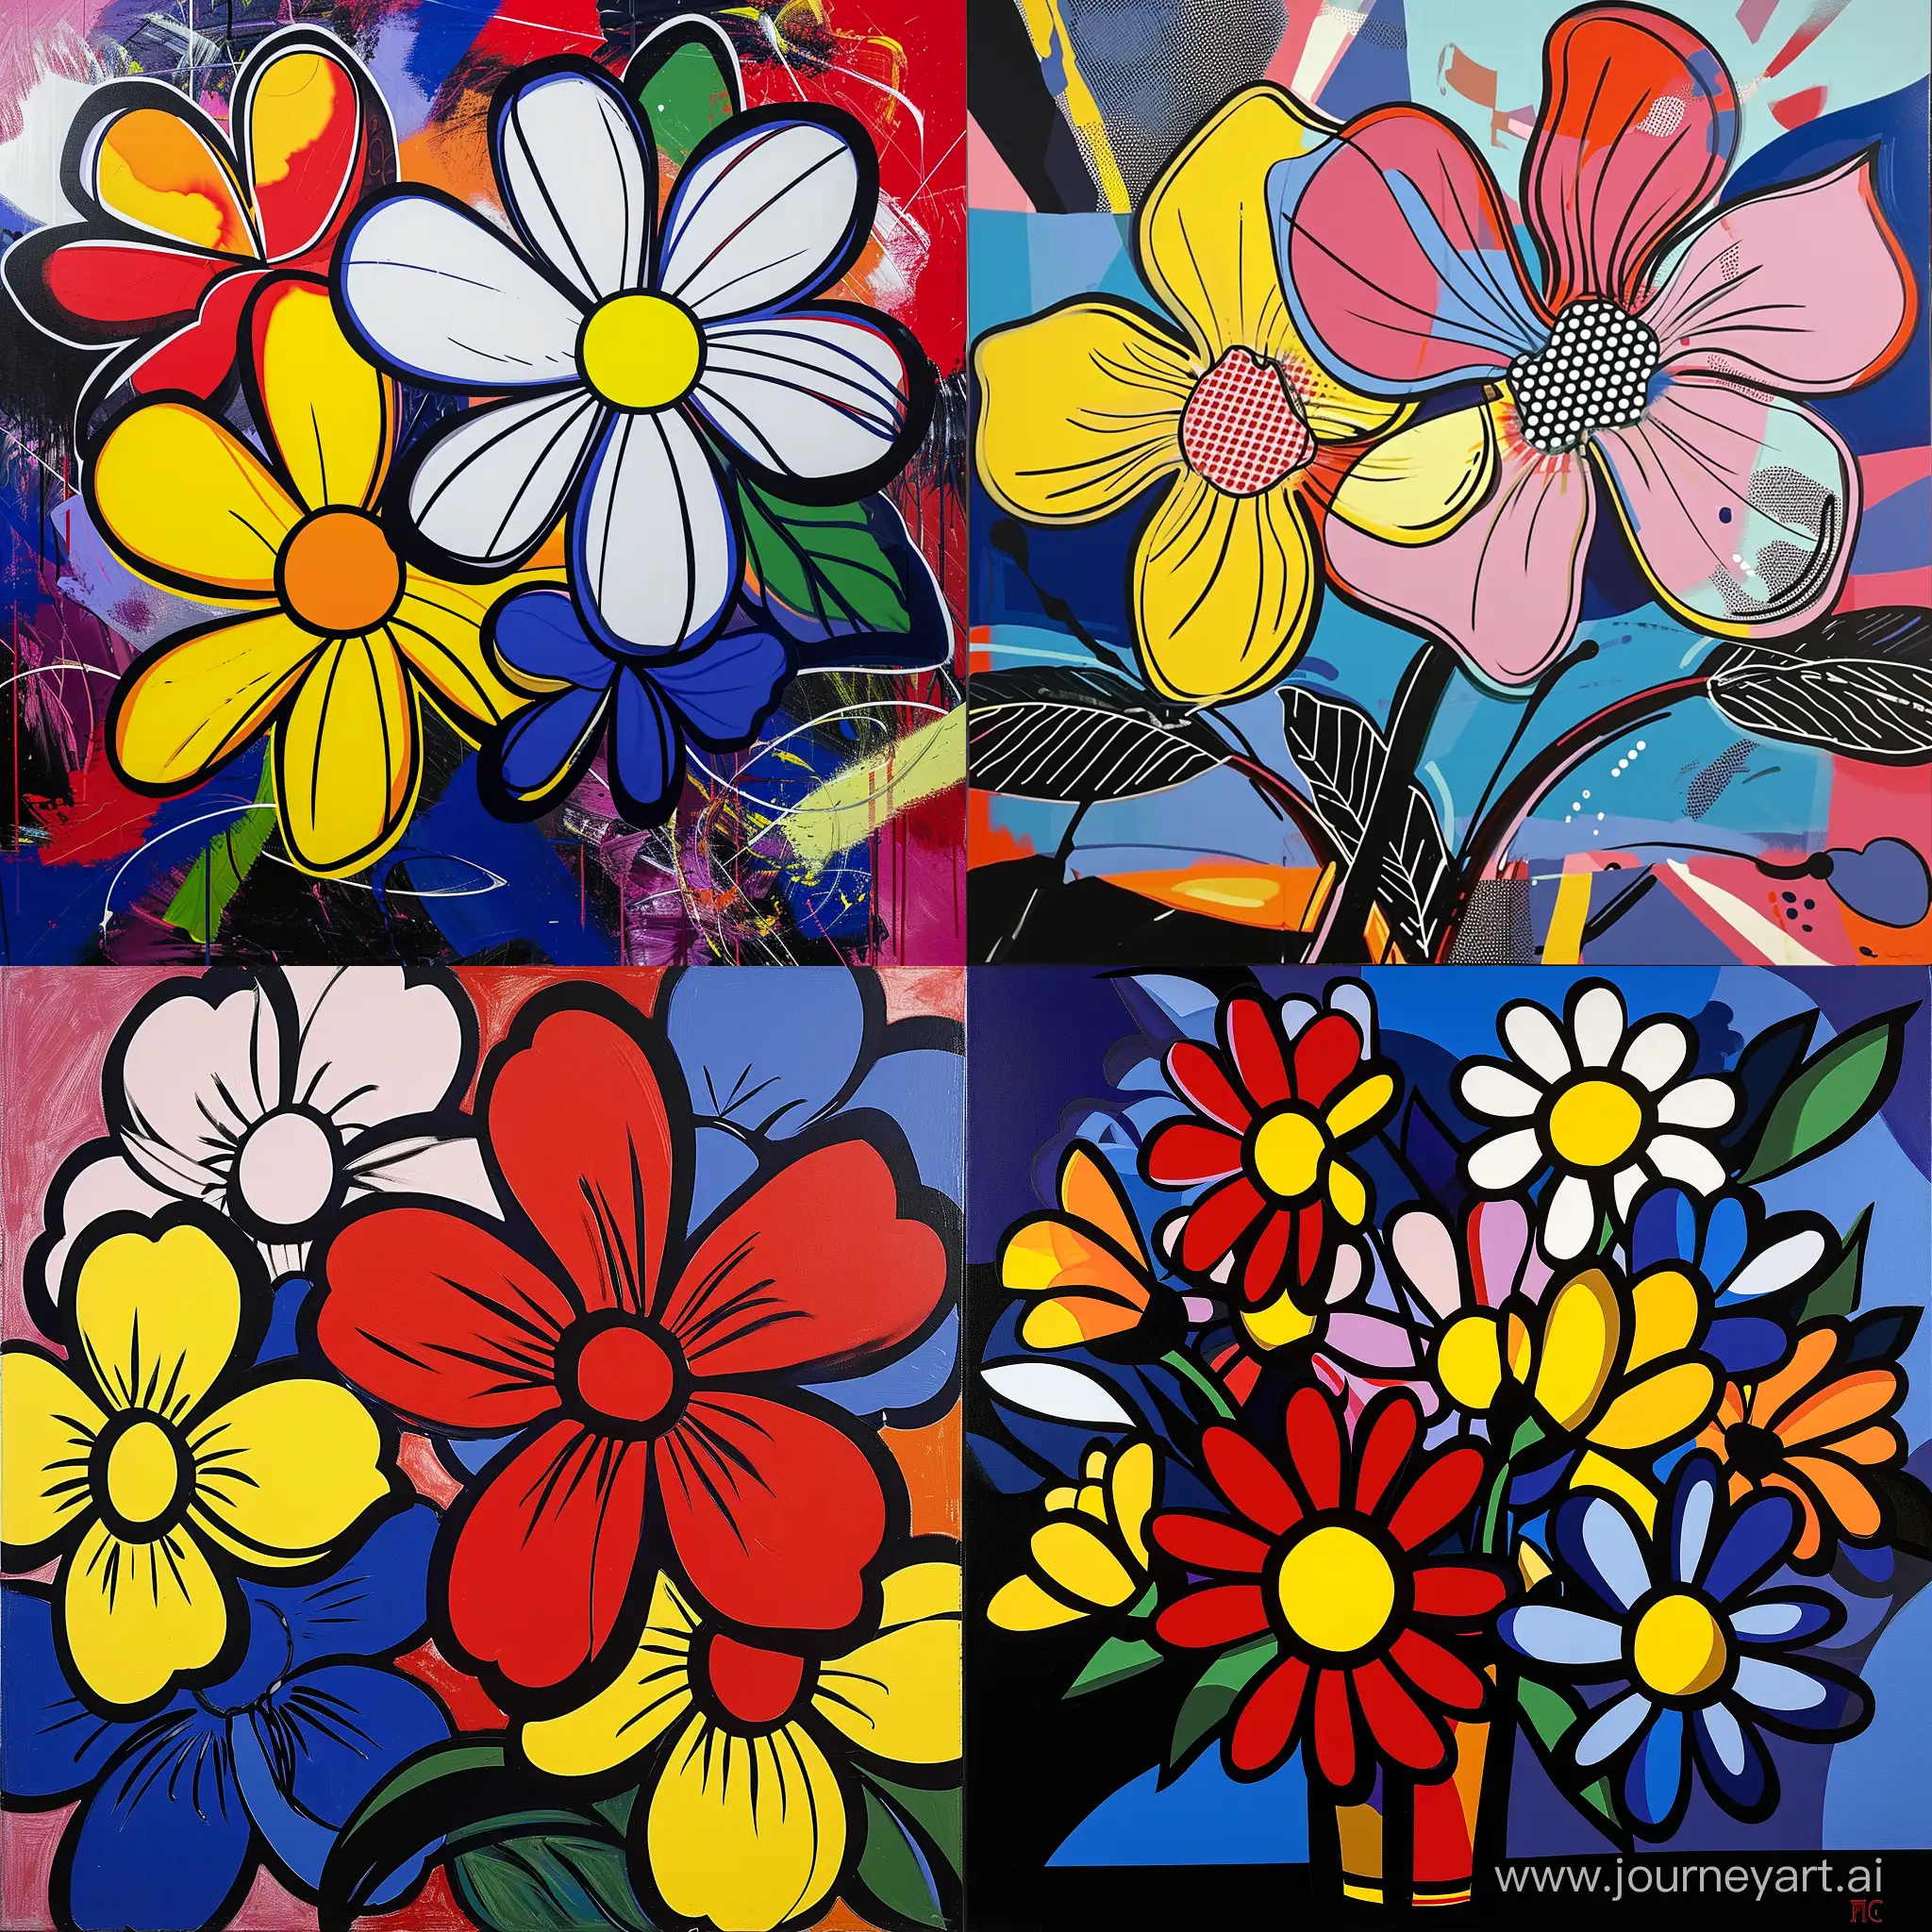 Vibrant-Abstract-Flowers-Inspired-by-Picasso-Lichtenstein-and-Mcbess